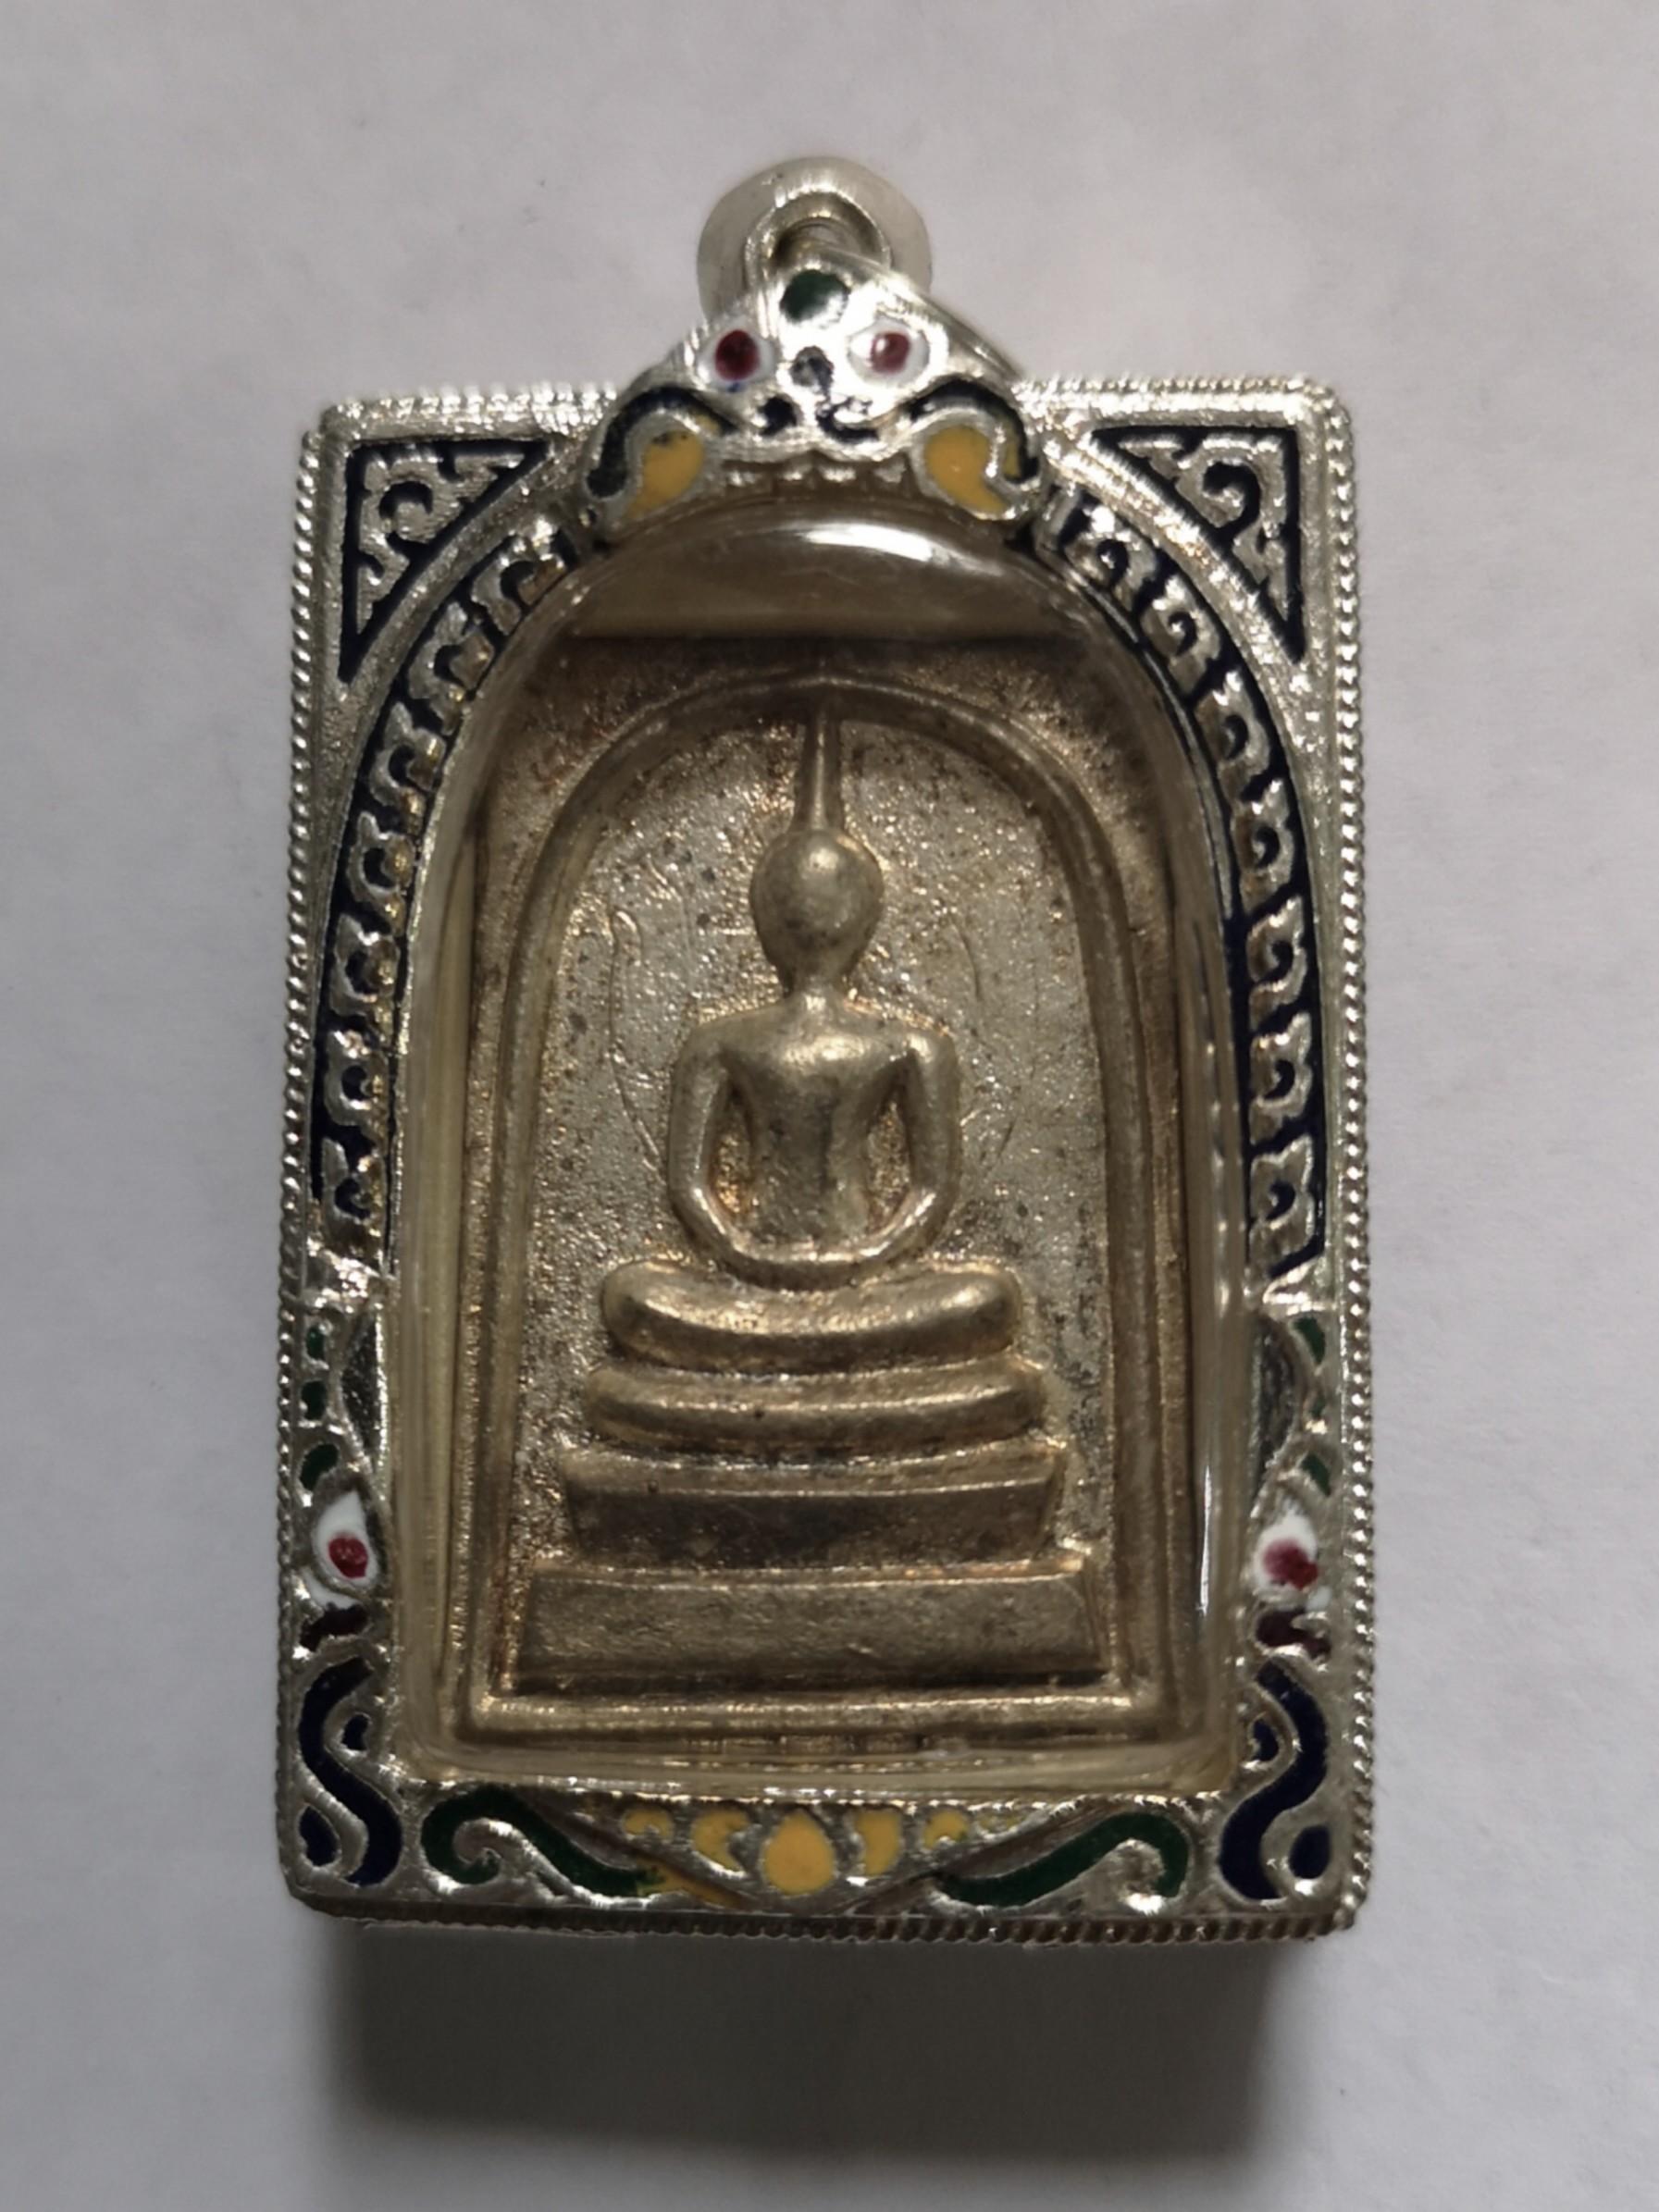 LP Heng Phra Somdej (metal/silver), Hobbies  Toys, Memorabilia   Collectibles, Religious Items on Carousell